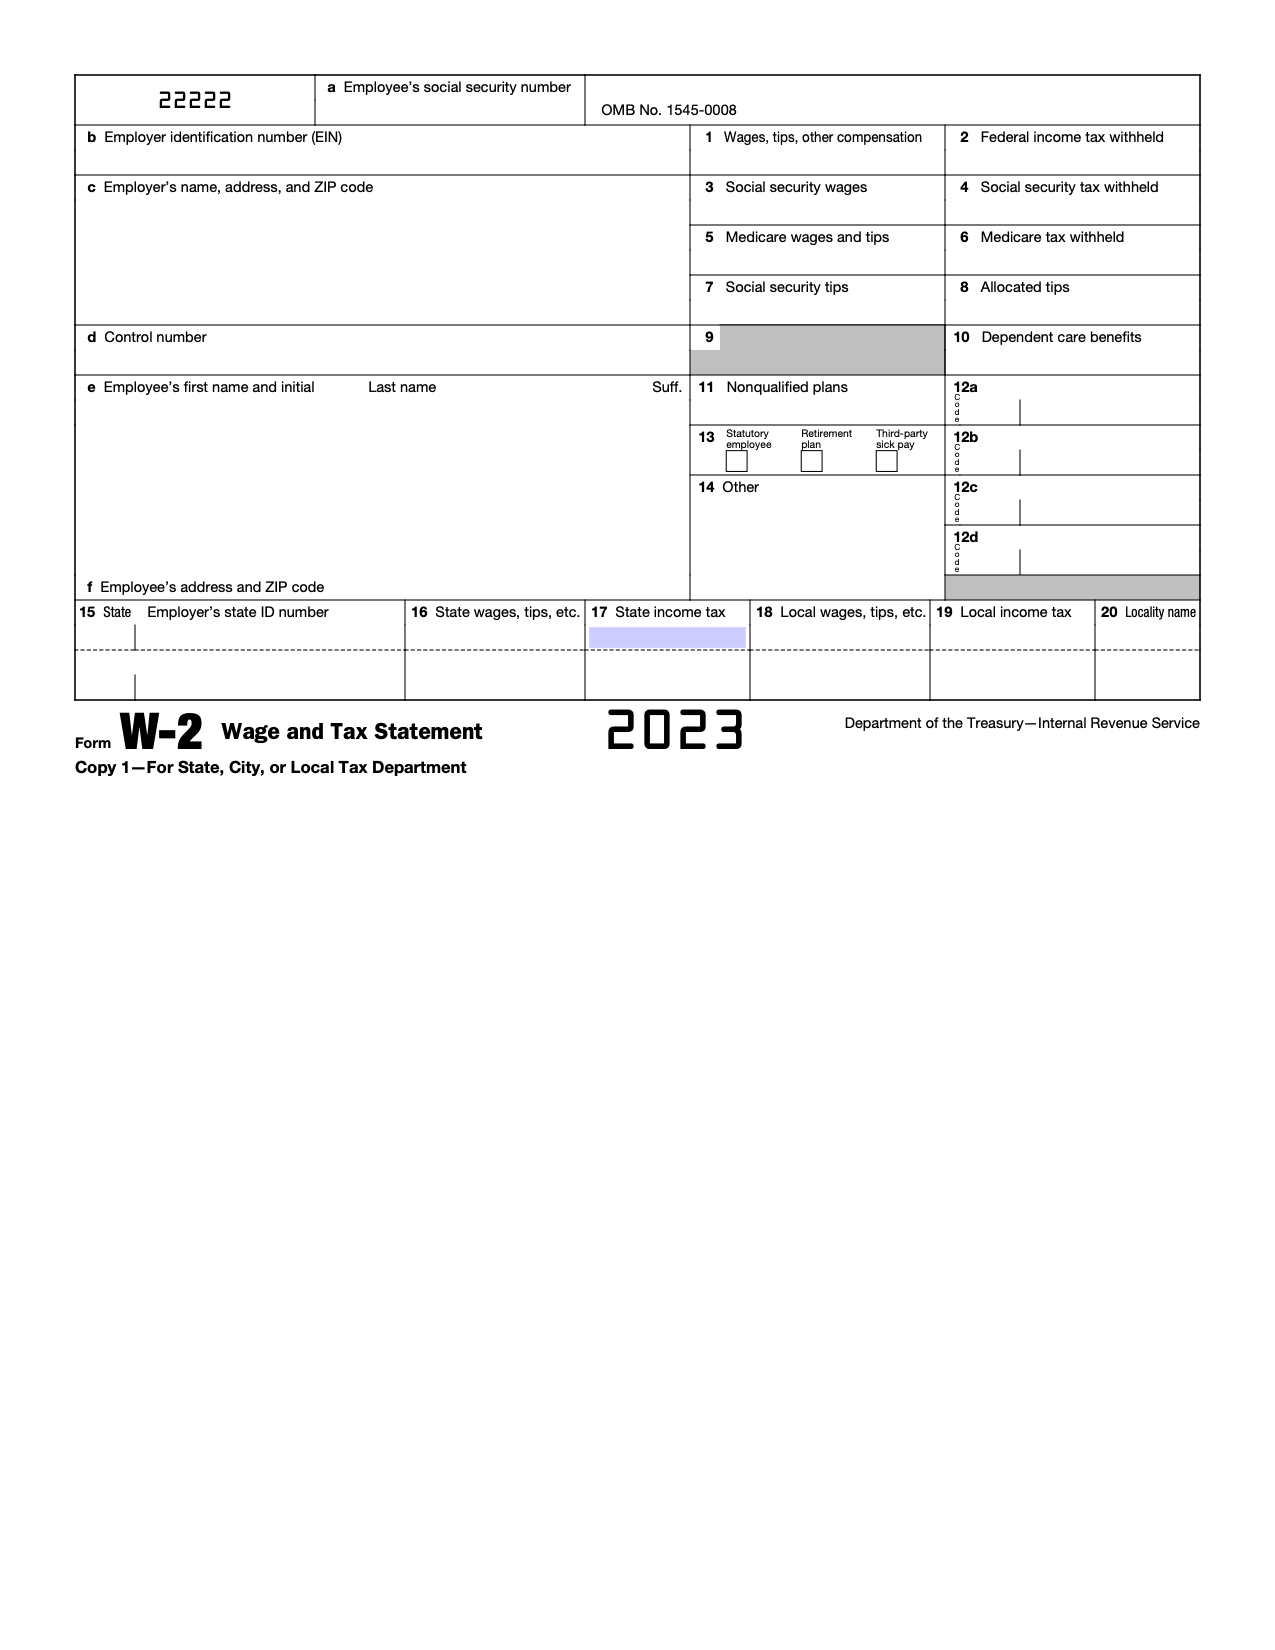 Free Irs Form W-2 | Wage And Tax Statement - Pdf – Eforms inside Irs W2 Form Download